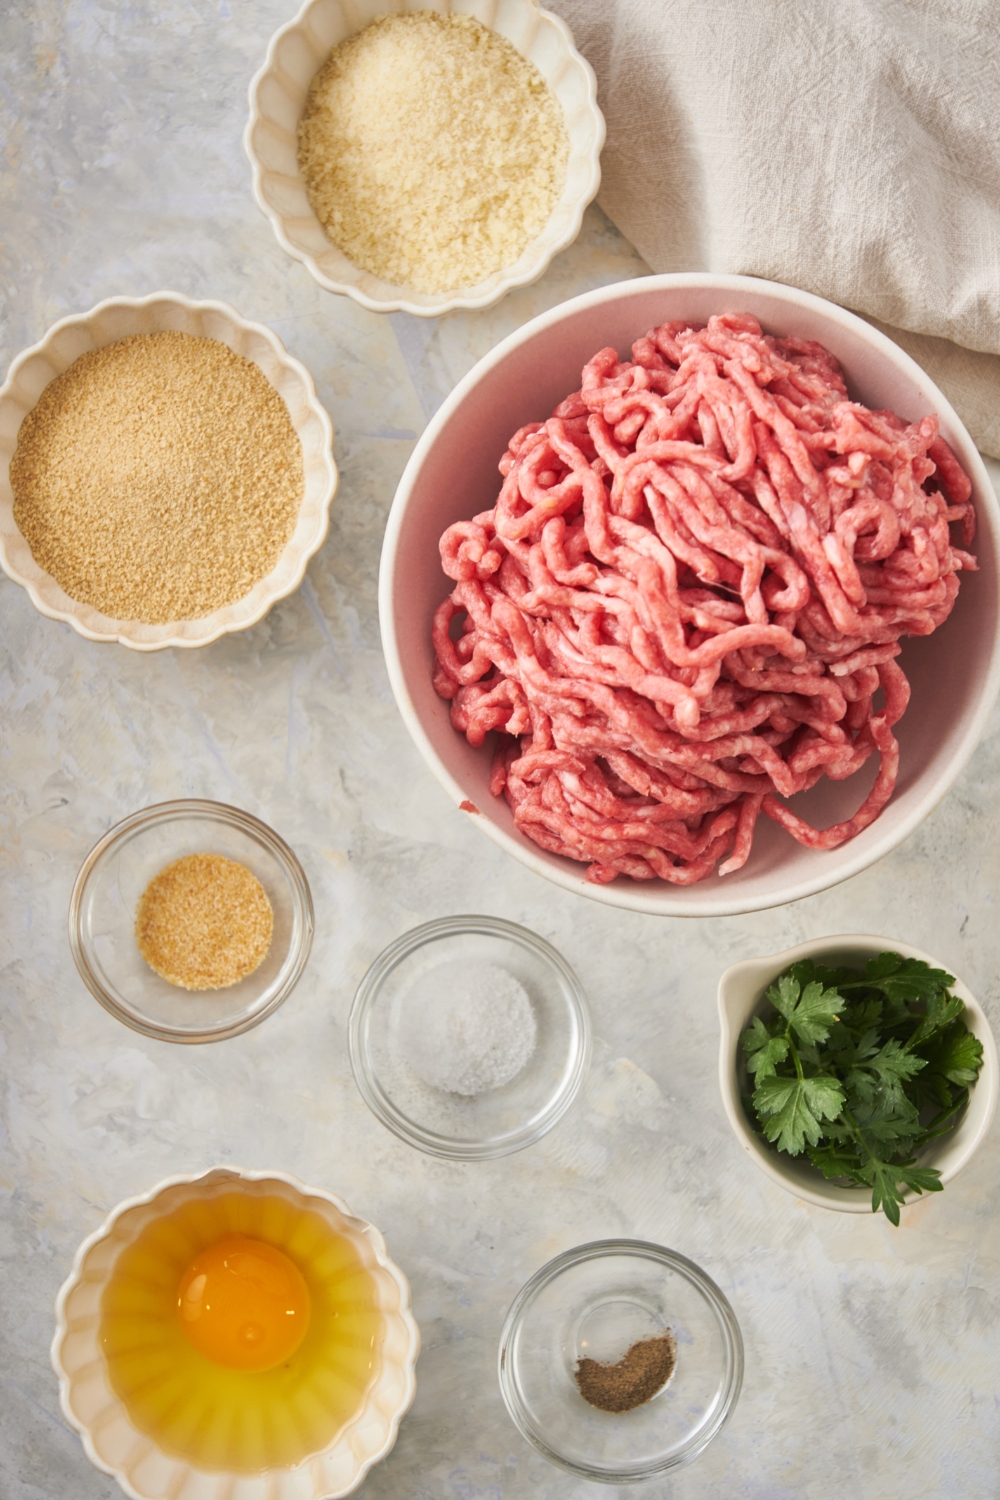 Overhead view of an assortment of ingredients including bowls of raw ground beef, an egg, green herbs, spices, bread crumbs, and parmesan cheese.